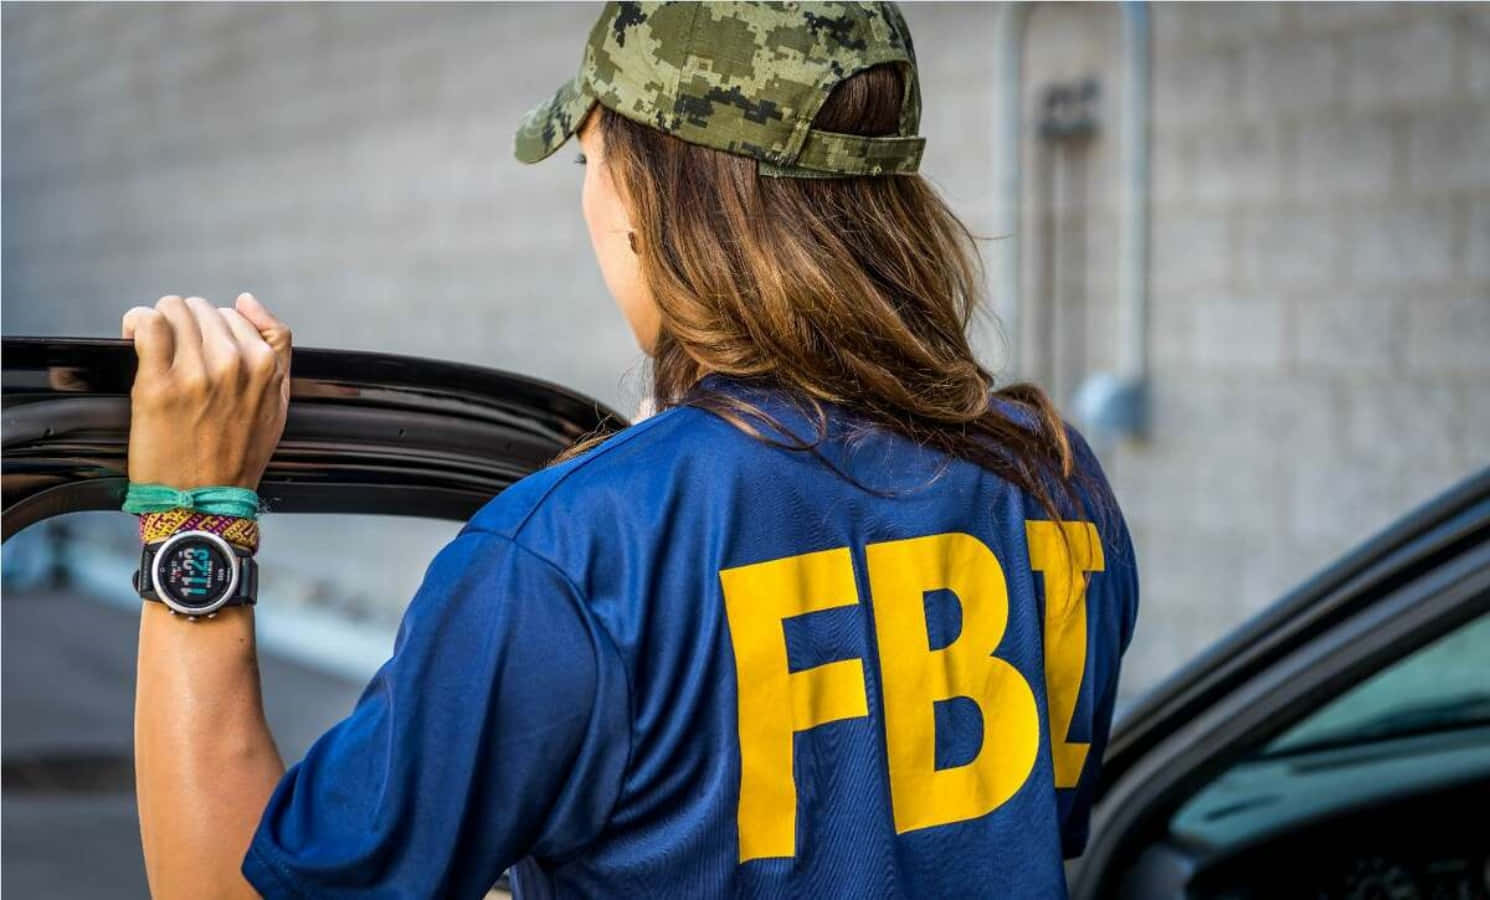 Fbi Officer In A Camouflage Shirt Leaning Out Of A Car